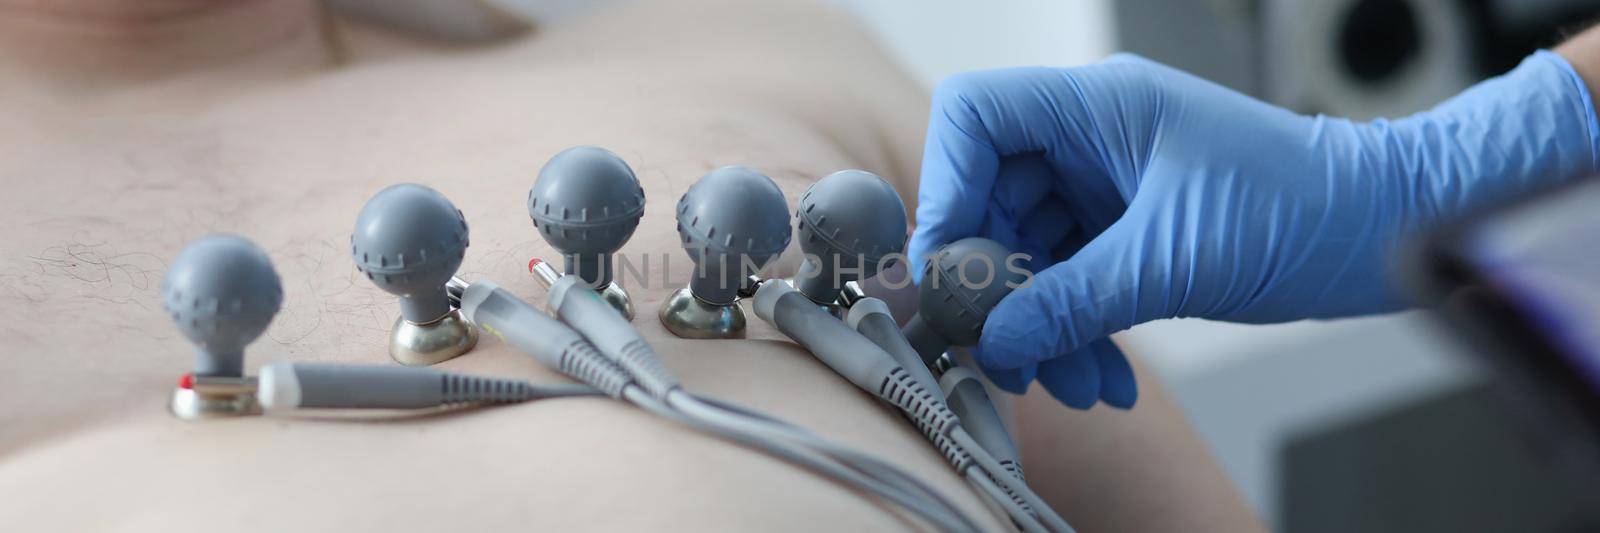 Nurse attaching suction cups to patient chest to record electrocardiogram closeup by kuprevich